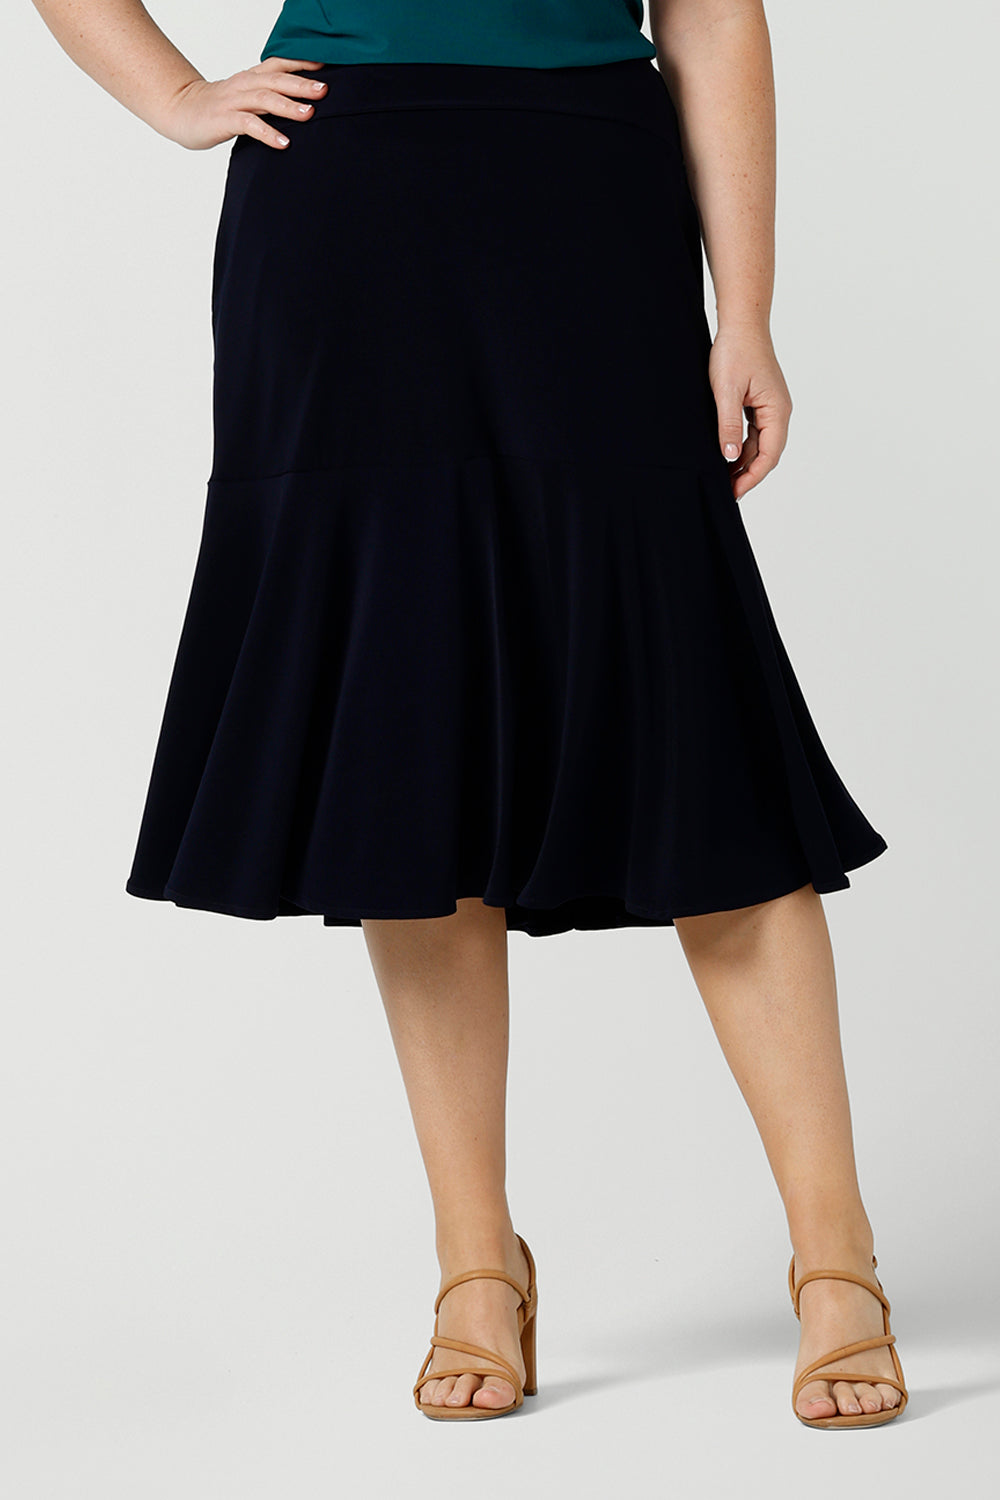 A great example of Australian-made skirts, this navy blue knee-length skirt in comfortable jersey fabric is shown in a size 12 as workwear for curvy women. Available from Australian ladies clothing brand, Leina & Fleur, this classic navy skirt is available as petite to plus size office wear in their online boutique.